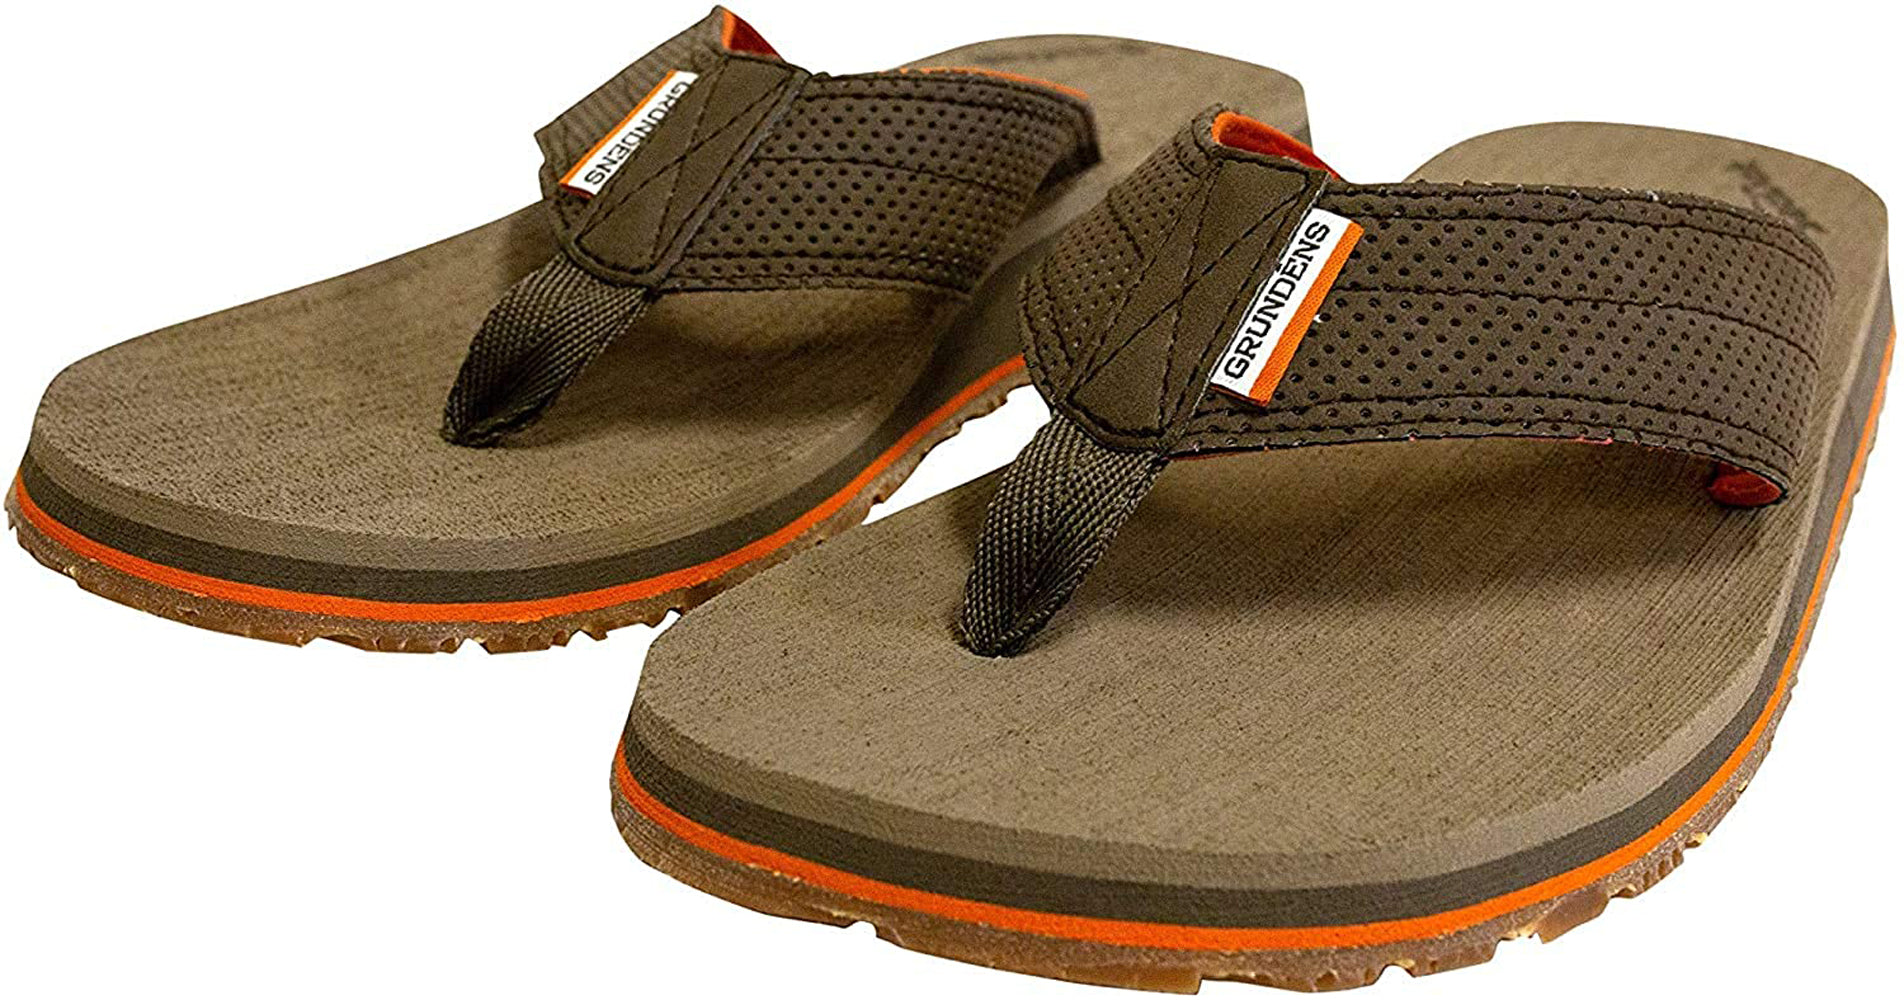 Deck Hand Sandal in Brindle color from the side view